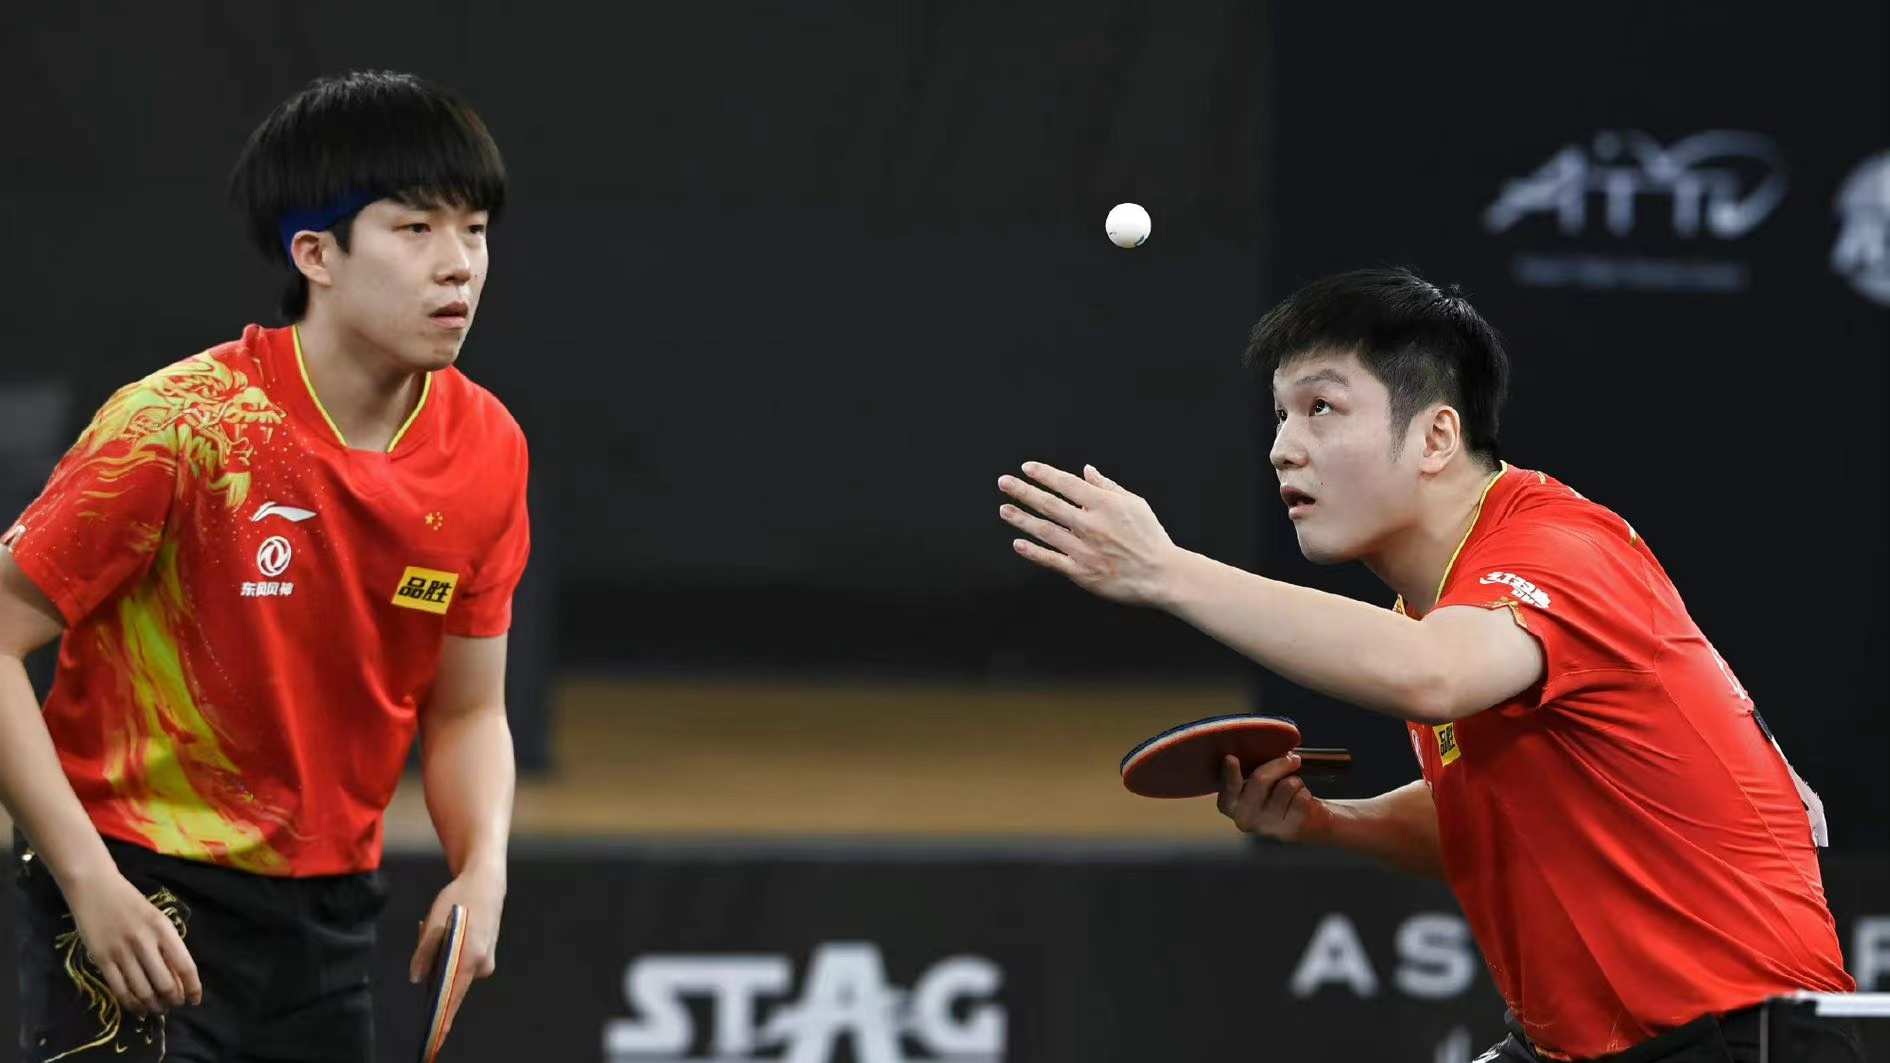 Wang Chuqin (L) and Fan Zhendong in action during the WTTC Asia Continental Stage in Doha, Qatar, January 9, 2023. /Xinhua